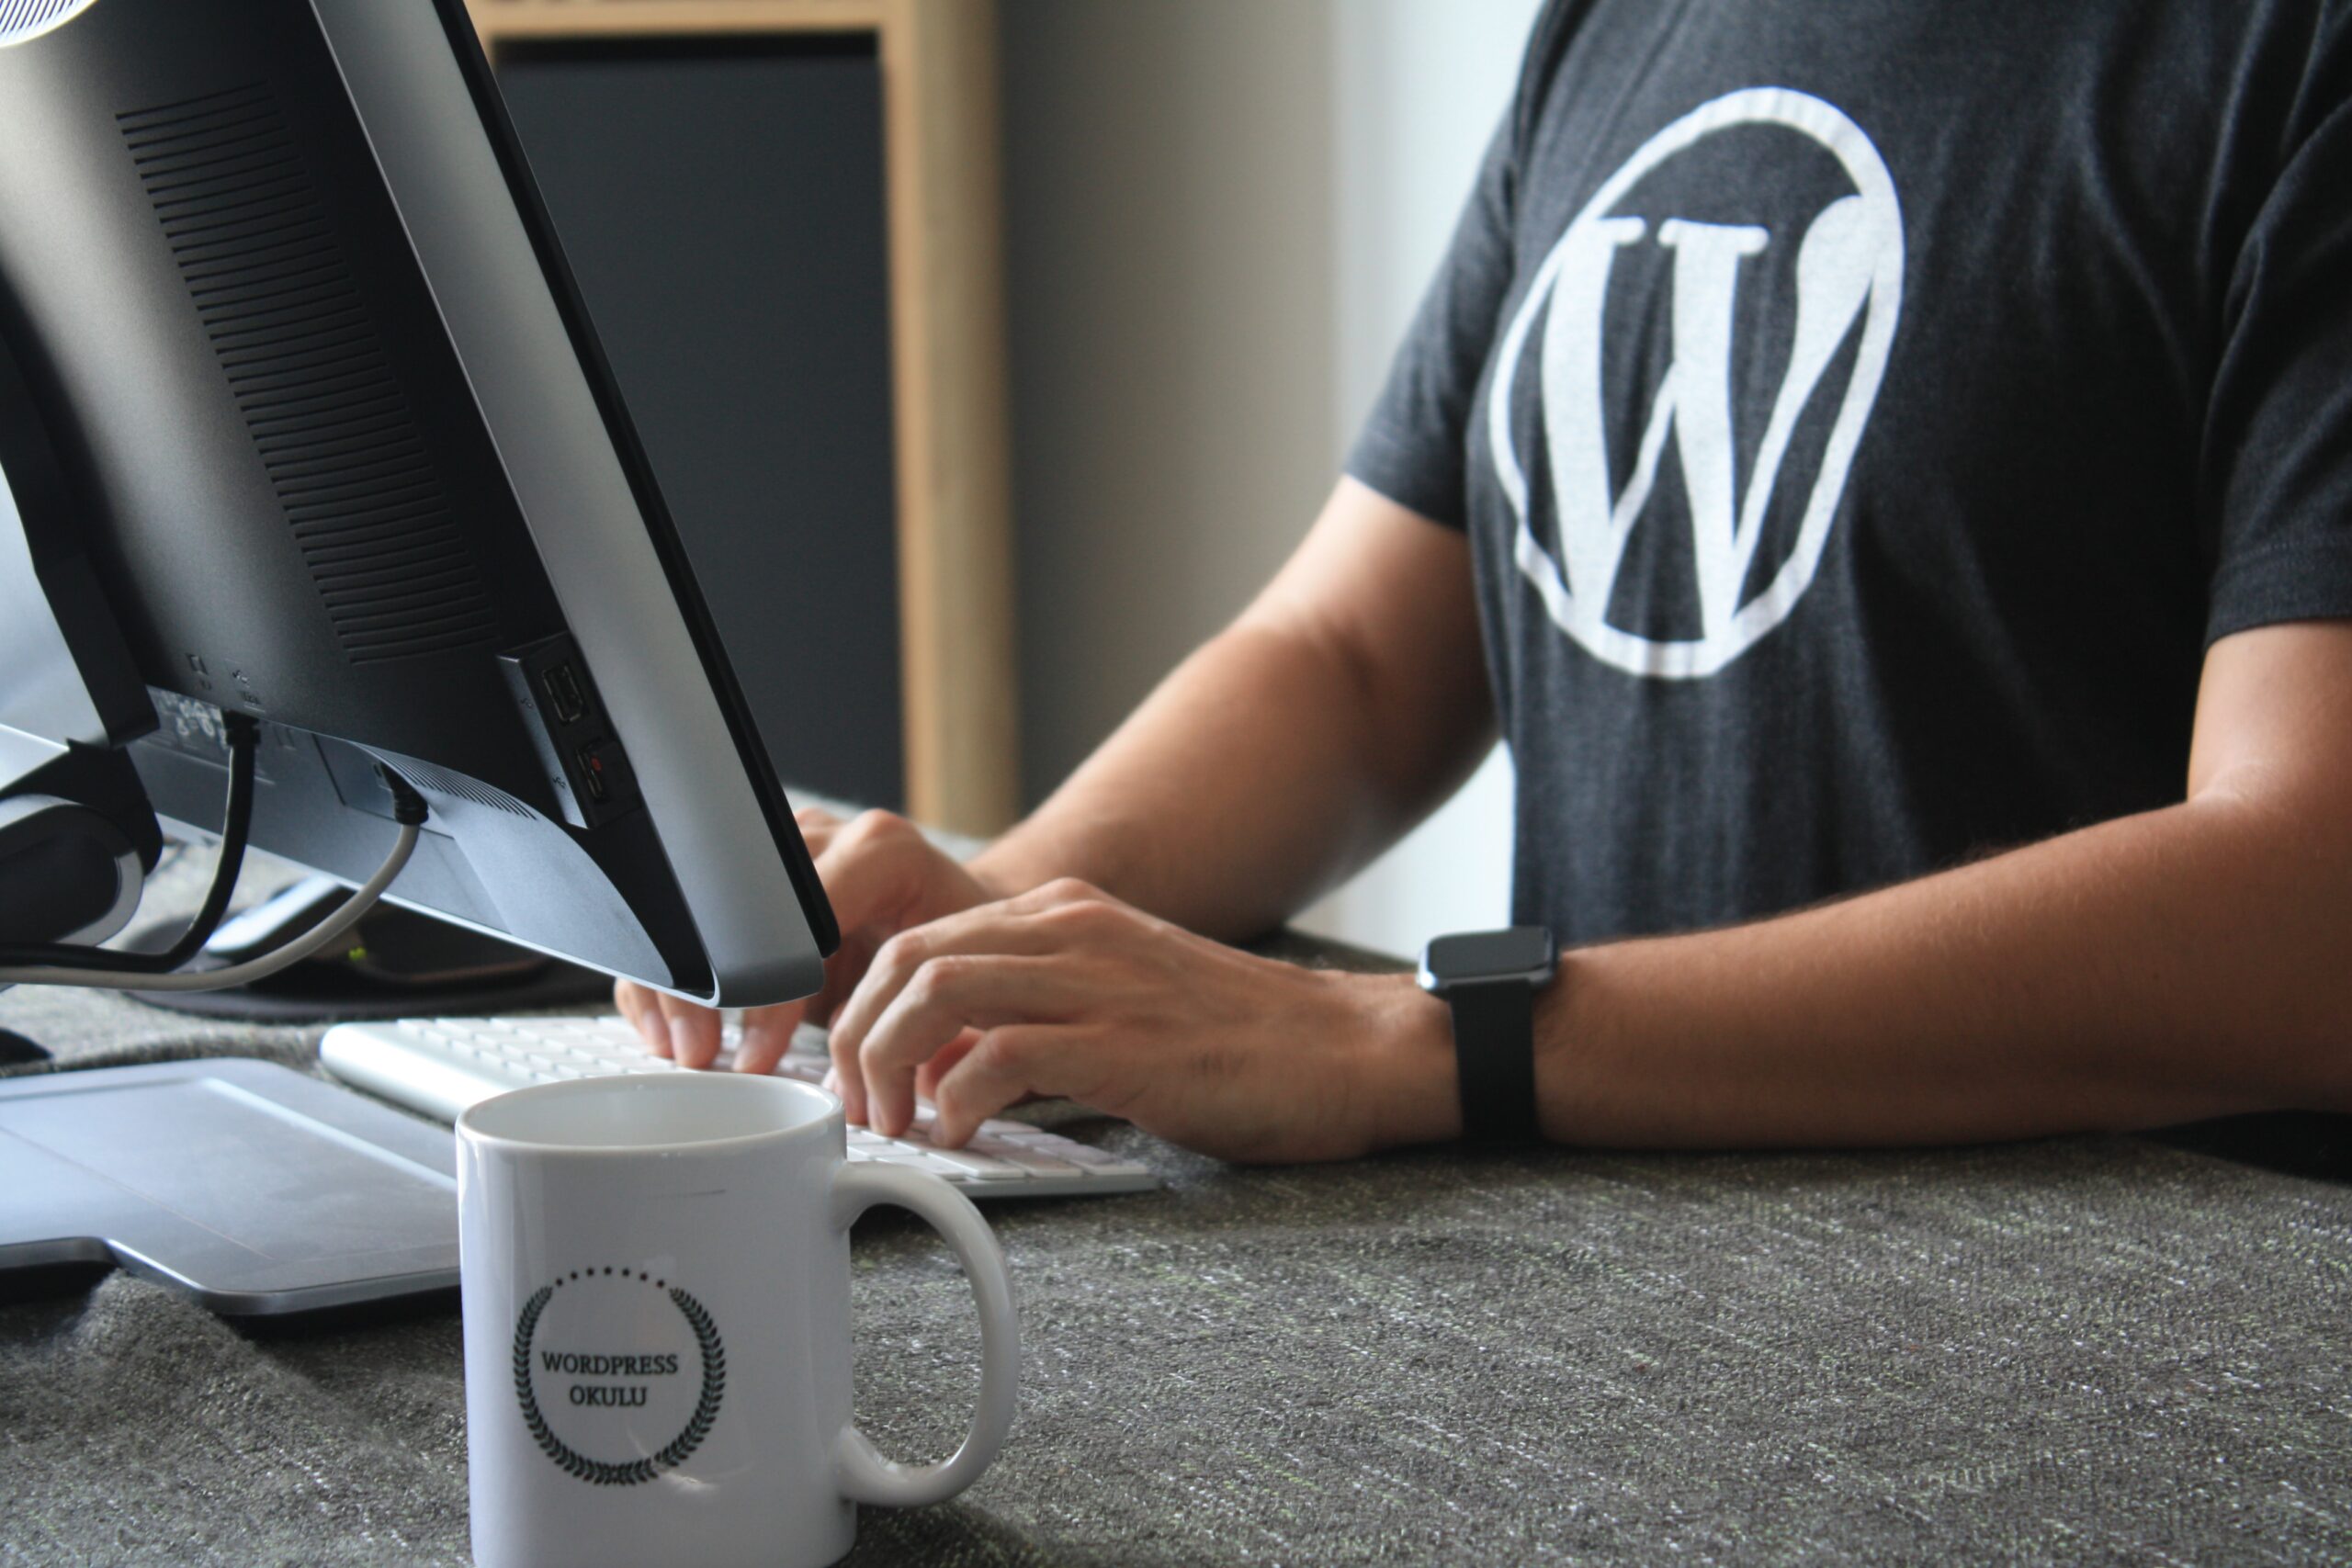 Featured image for “Enhance On-Site Search Experience with WordPress”